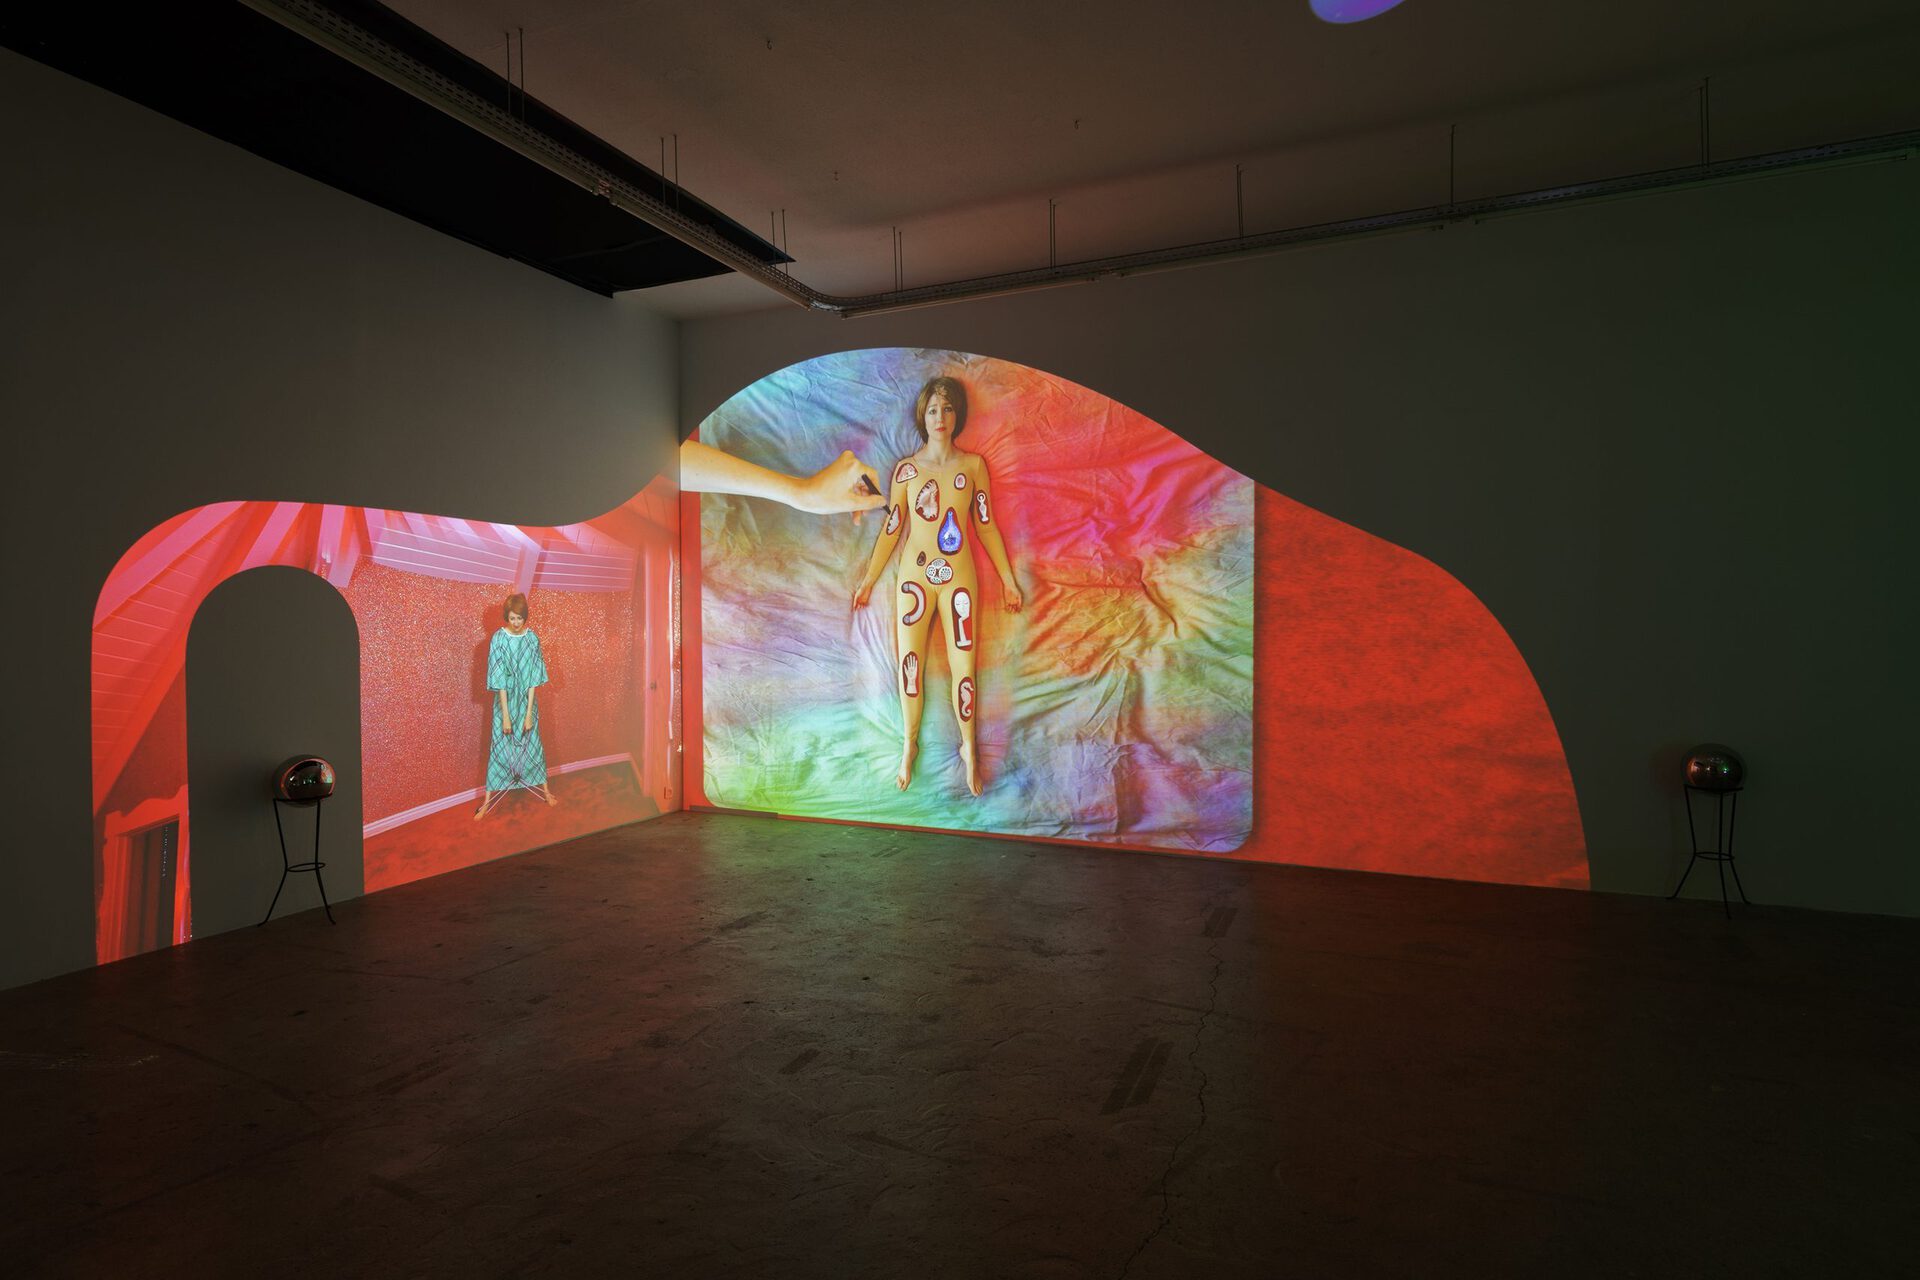 Shana Moulton, The Invisible Seventh is the Mystic Column, 2022, synchronized projections, 7’34